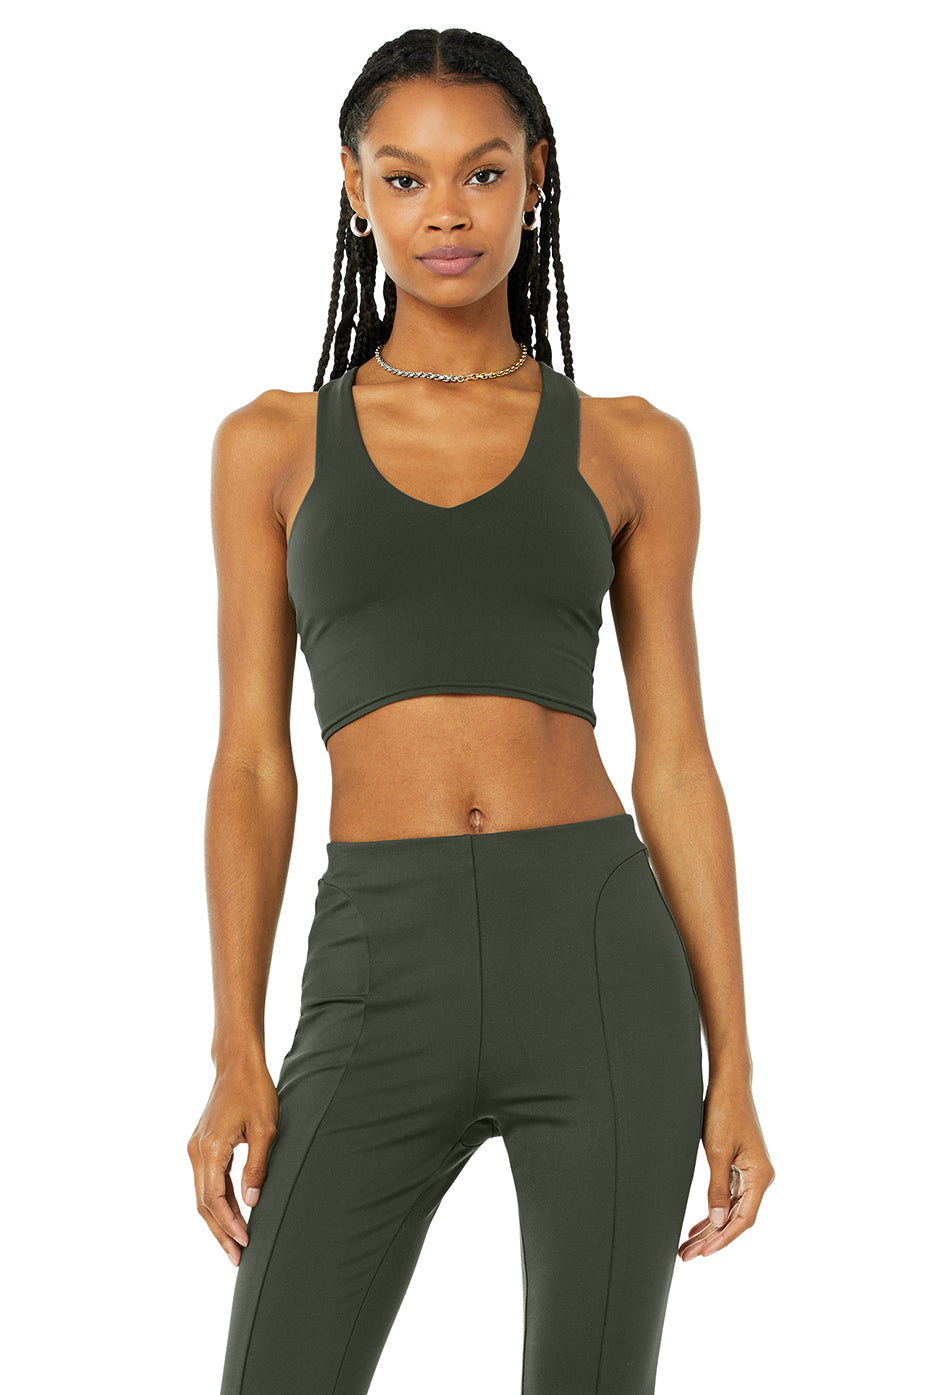 Airbrush Real Bra Tank Top in Dark Cactus by Alo Yoga - Work Well